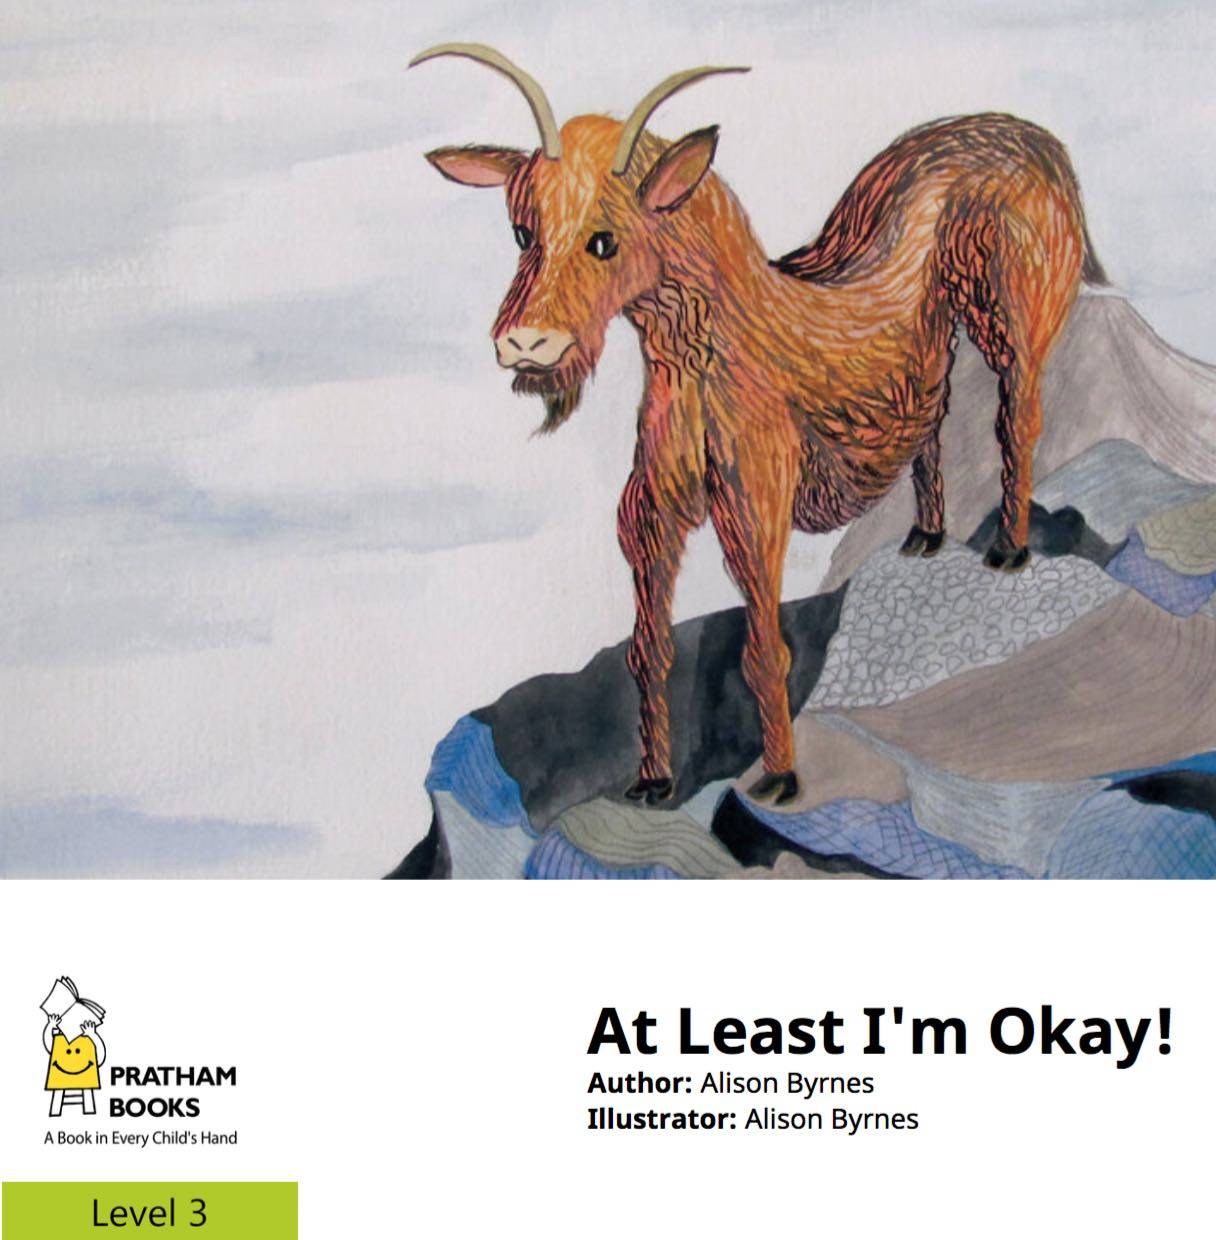 at least I'm okay picture book about climate change